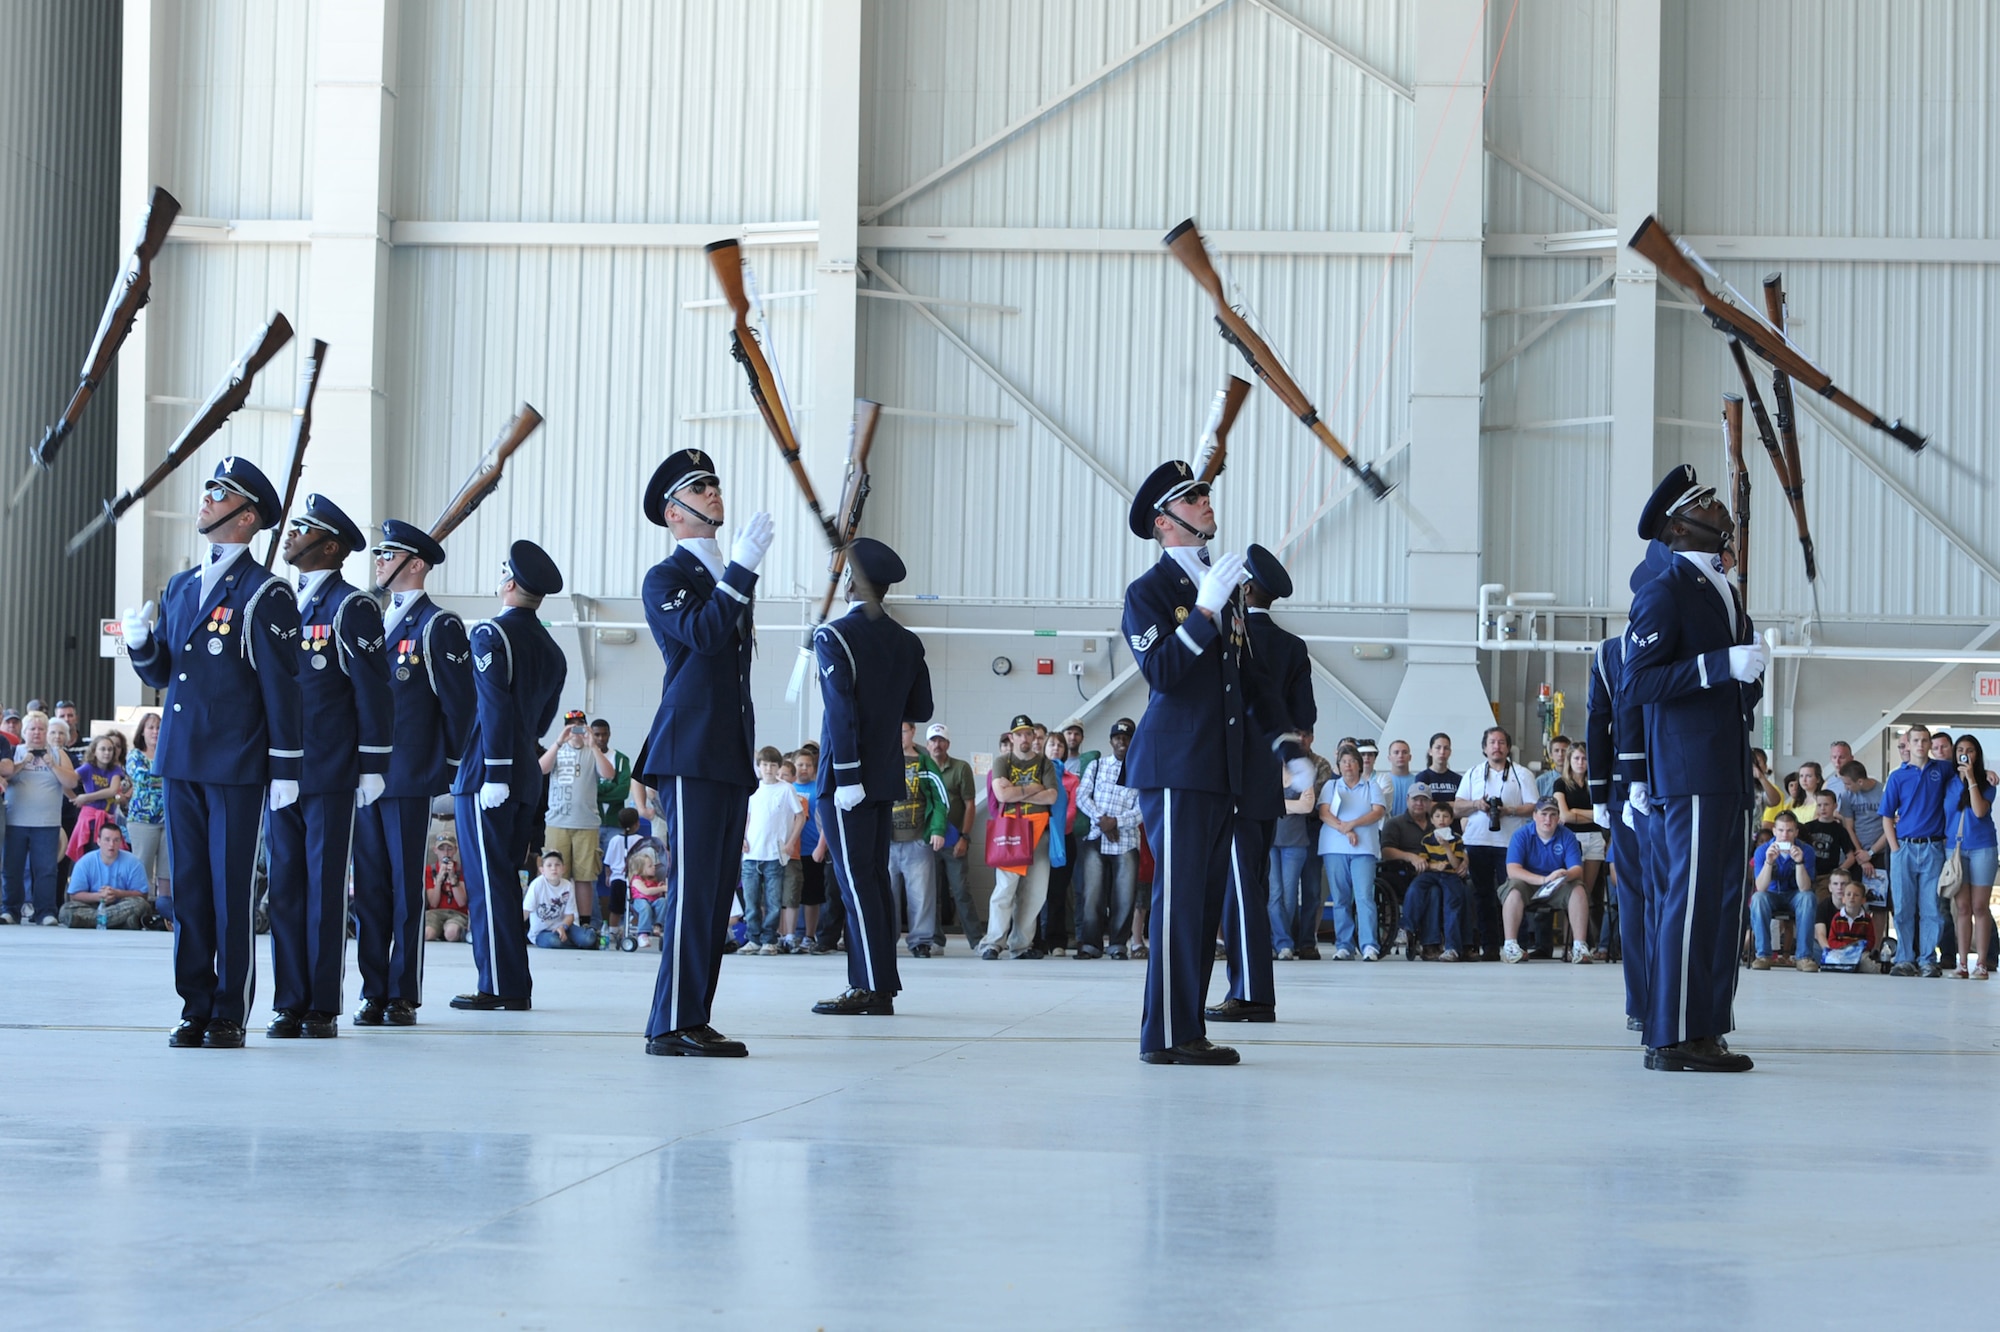 SEYMOUR JOHNSON AIR FORCE BASE, N.C. -- Airmen from the U.S. Air Force Honor Guard drill team perform during the Wings Over Wayne Air Show and Open House here, April 17, 2011. The honor guard's mission is to represent Airmen to the American and international public. (U.S. Air Force photo/Senior Airman Whitney Lambert) (RELEASED)